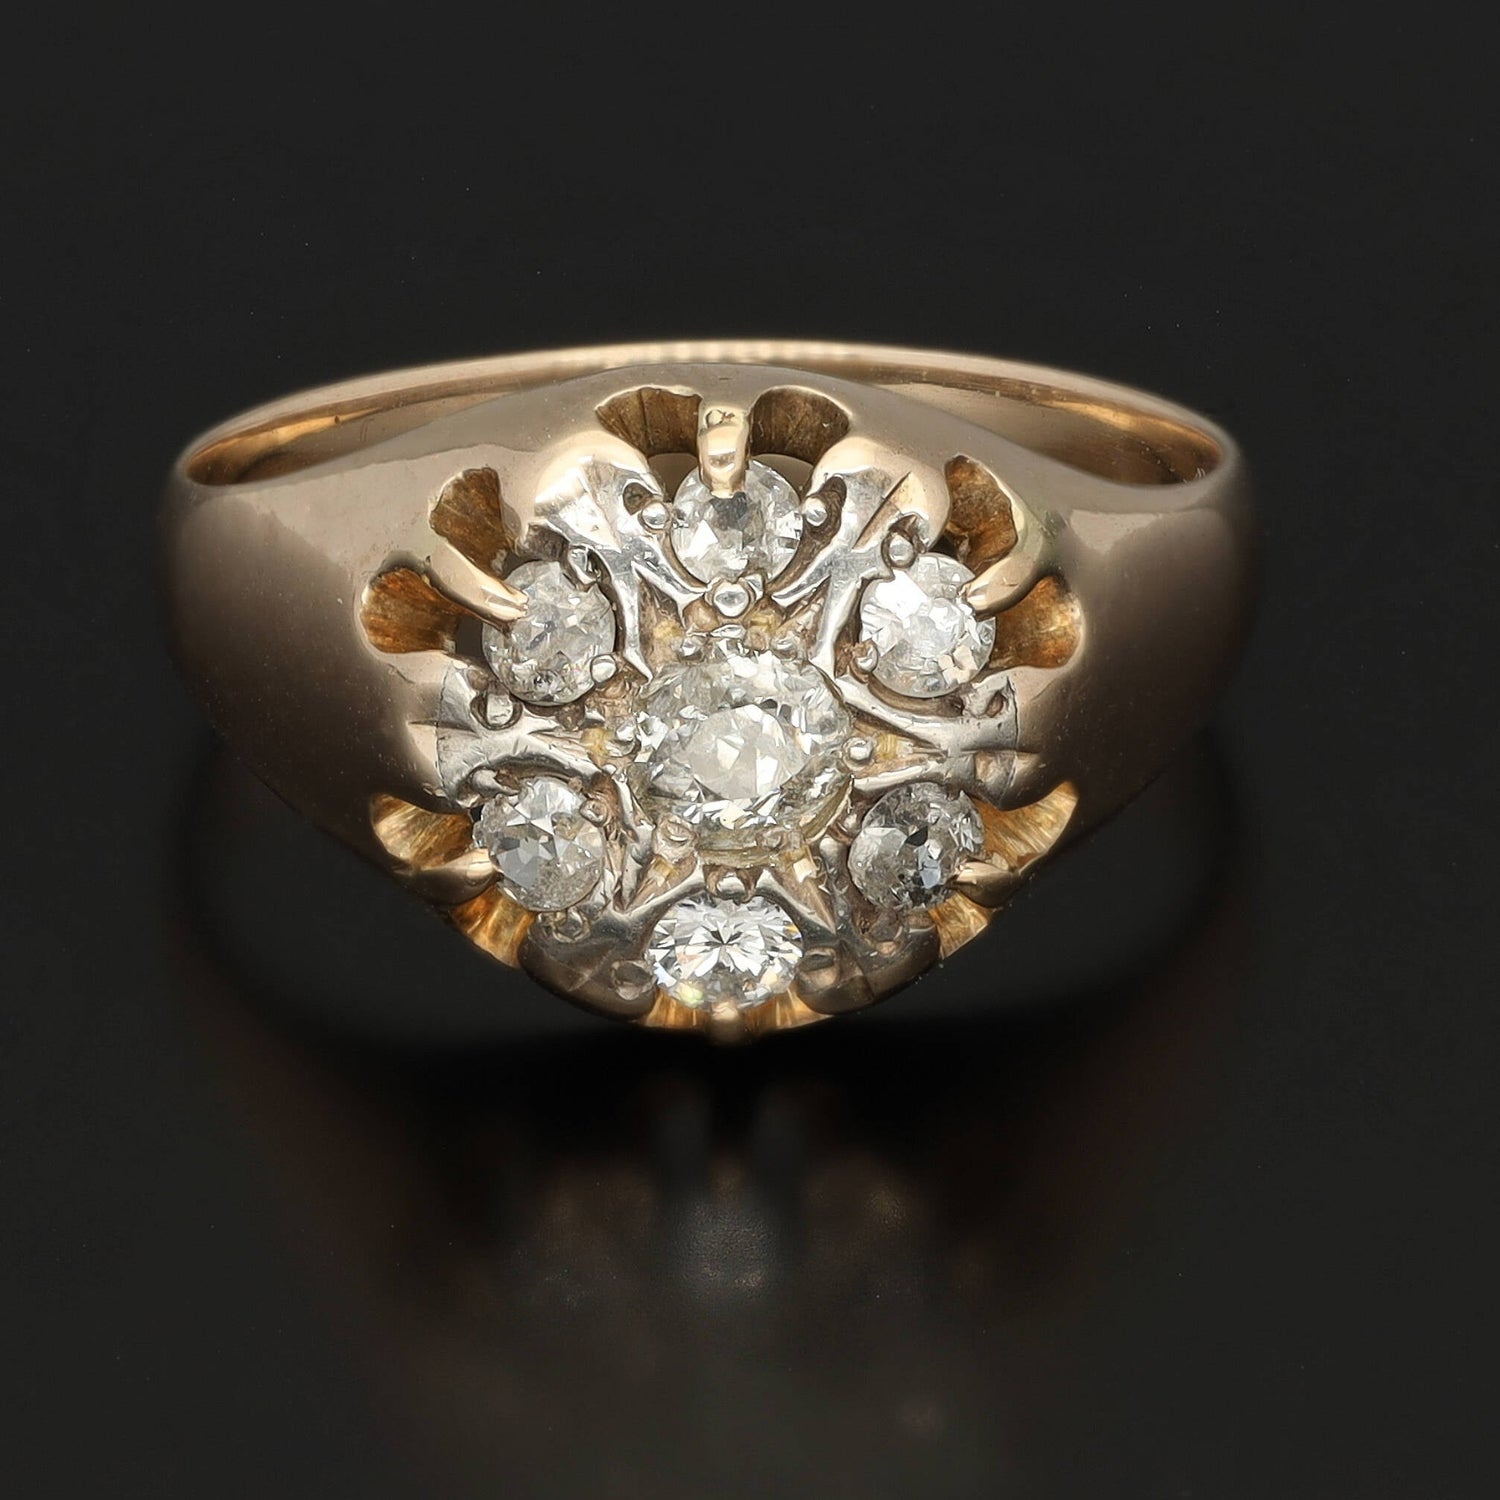 A substantial unisex diamond signet ring in solid 14k gold. This yellow gold signet ring is preserved in a superb condition and is fully hallmarked. The crown carries six 0.15 CT diamonds and the central diamond of circa 0.25 CT. The stones have a good quality SI1-2 and E-F color.   The face of the ring has a white gold plating surrounding the stones to enhance their shine. The body is made of yellow gold. The ring is a perfect vintage condition, cleaned and with serviced prongs.